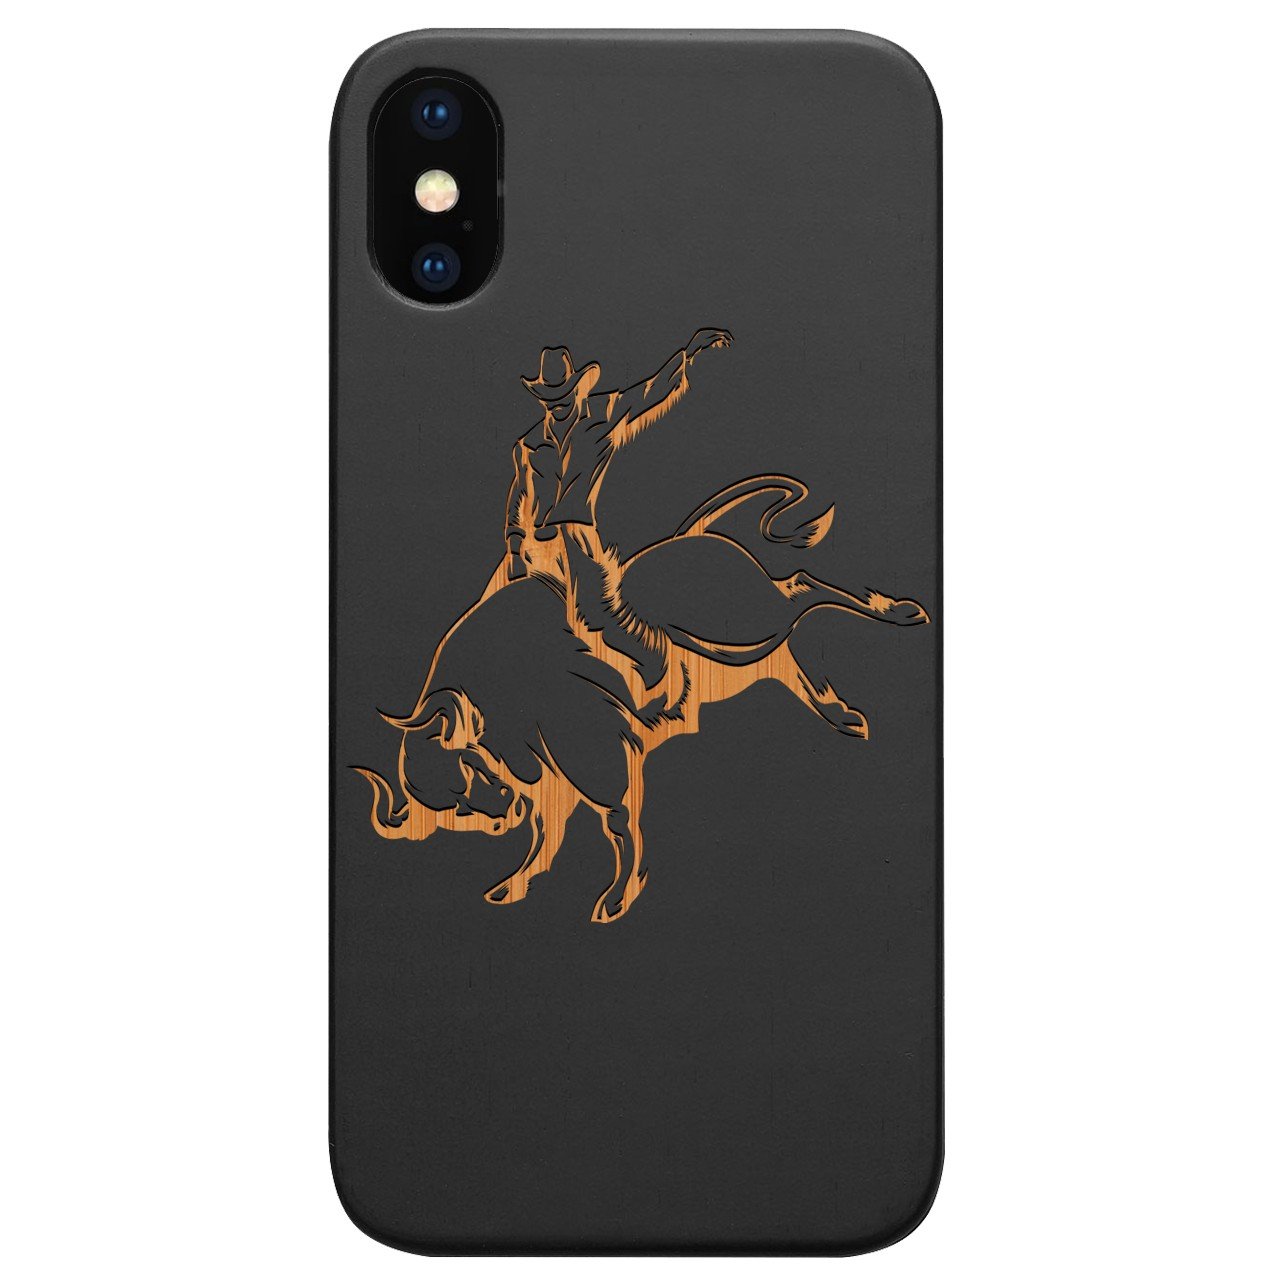 Bull Rider - Engraved - Wooden Phone Case